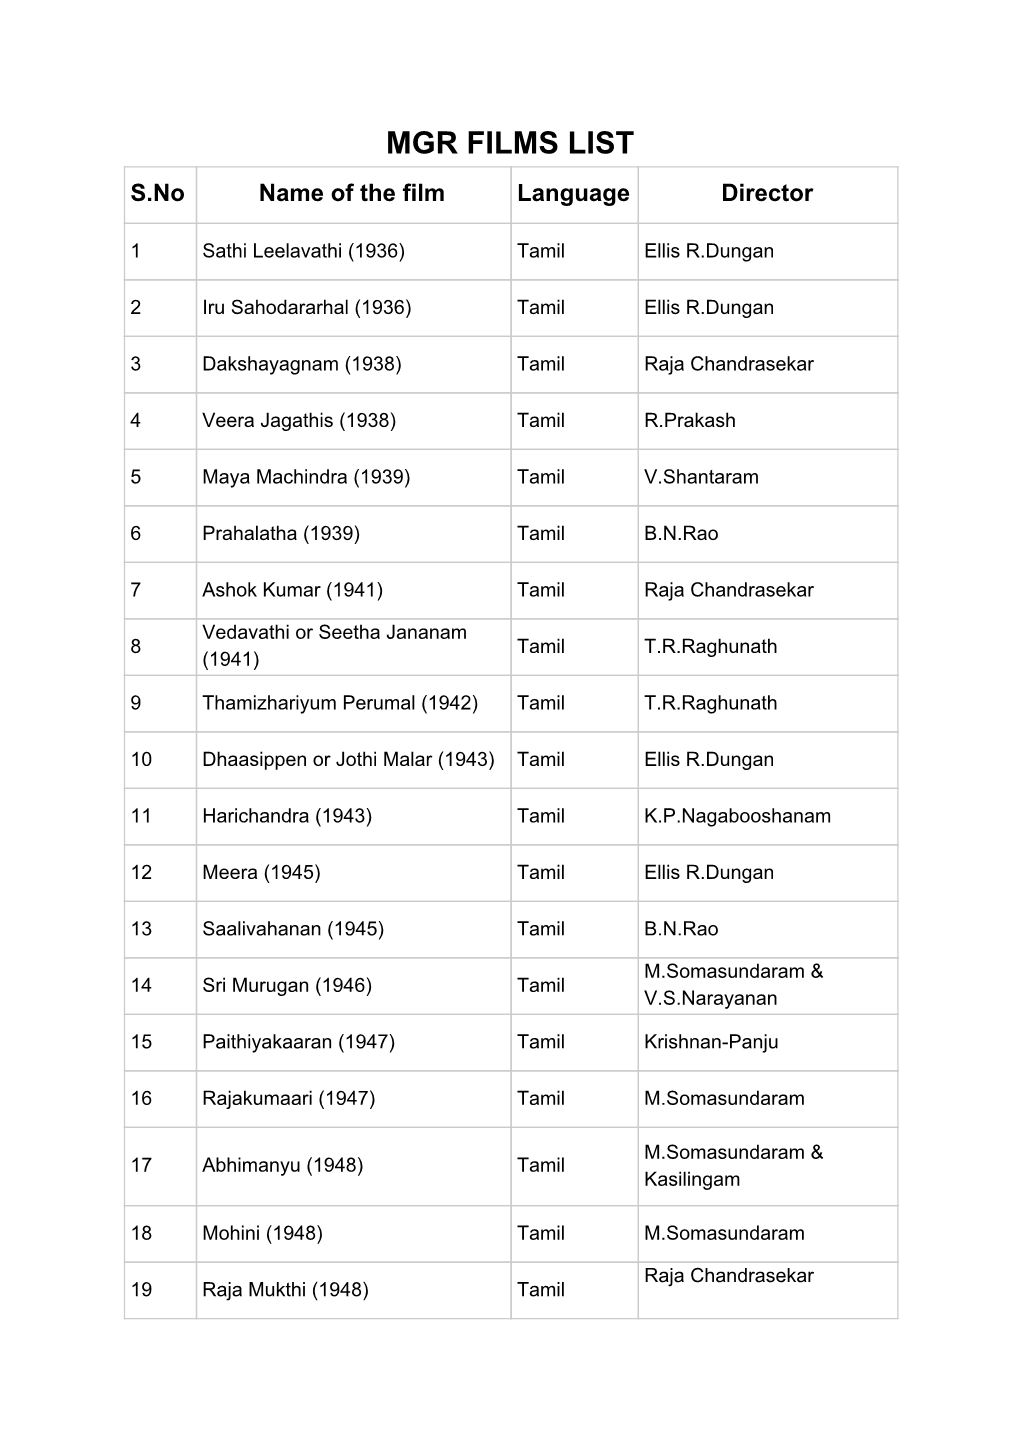 MGR FILMS LIST S.No Name of the Film Language Director